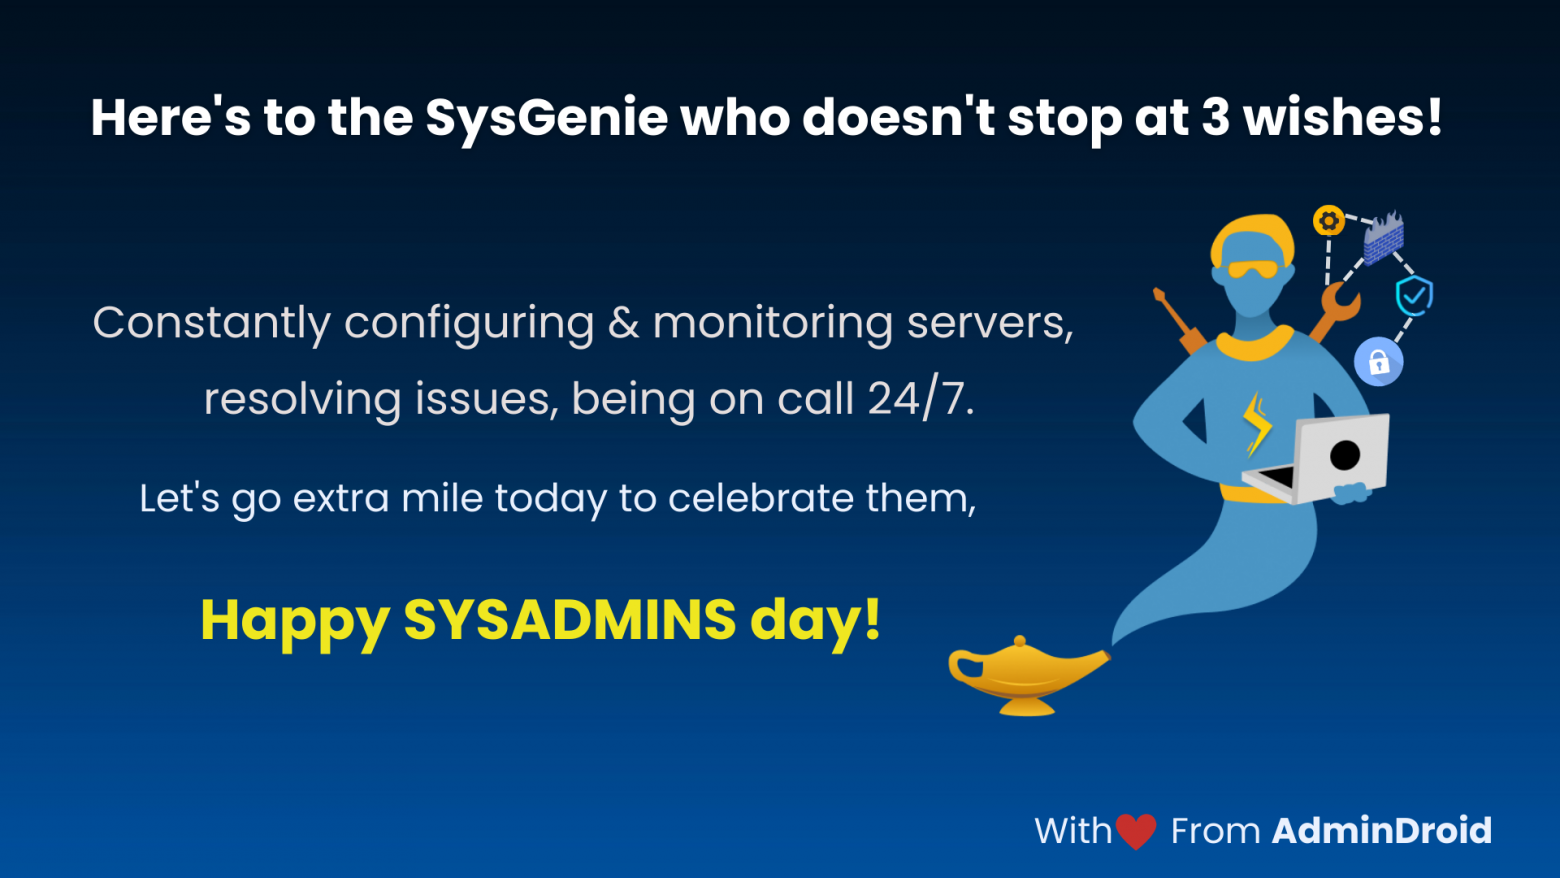 SysAdmin Day wishes from AdminDroid